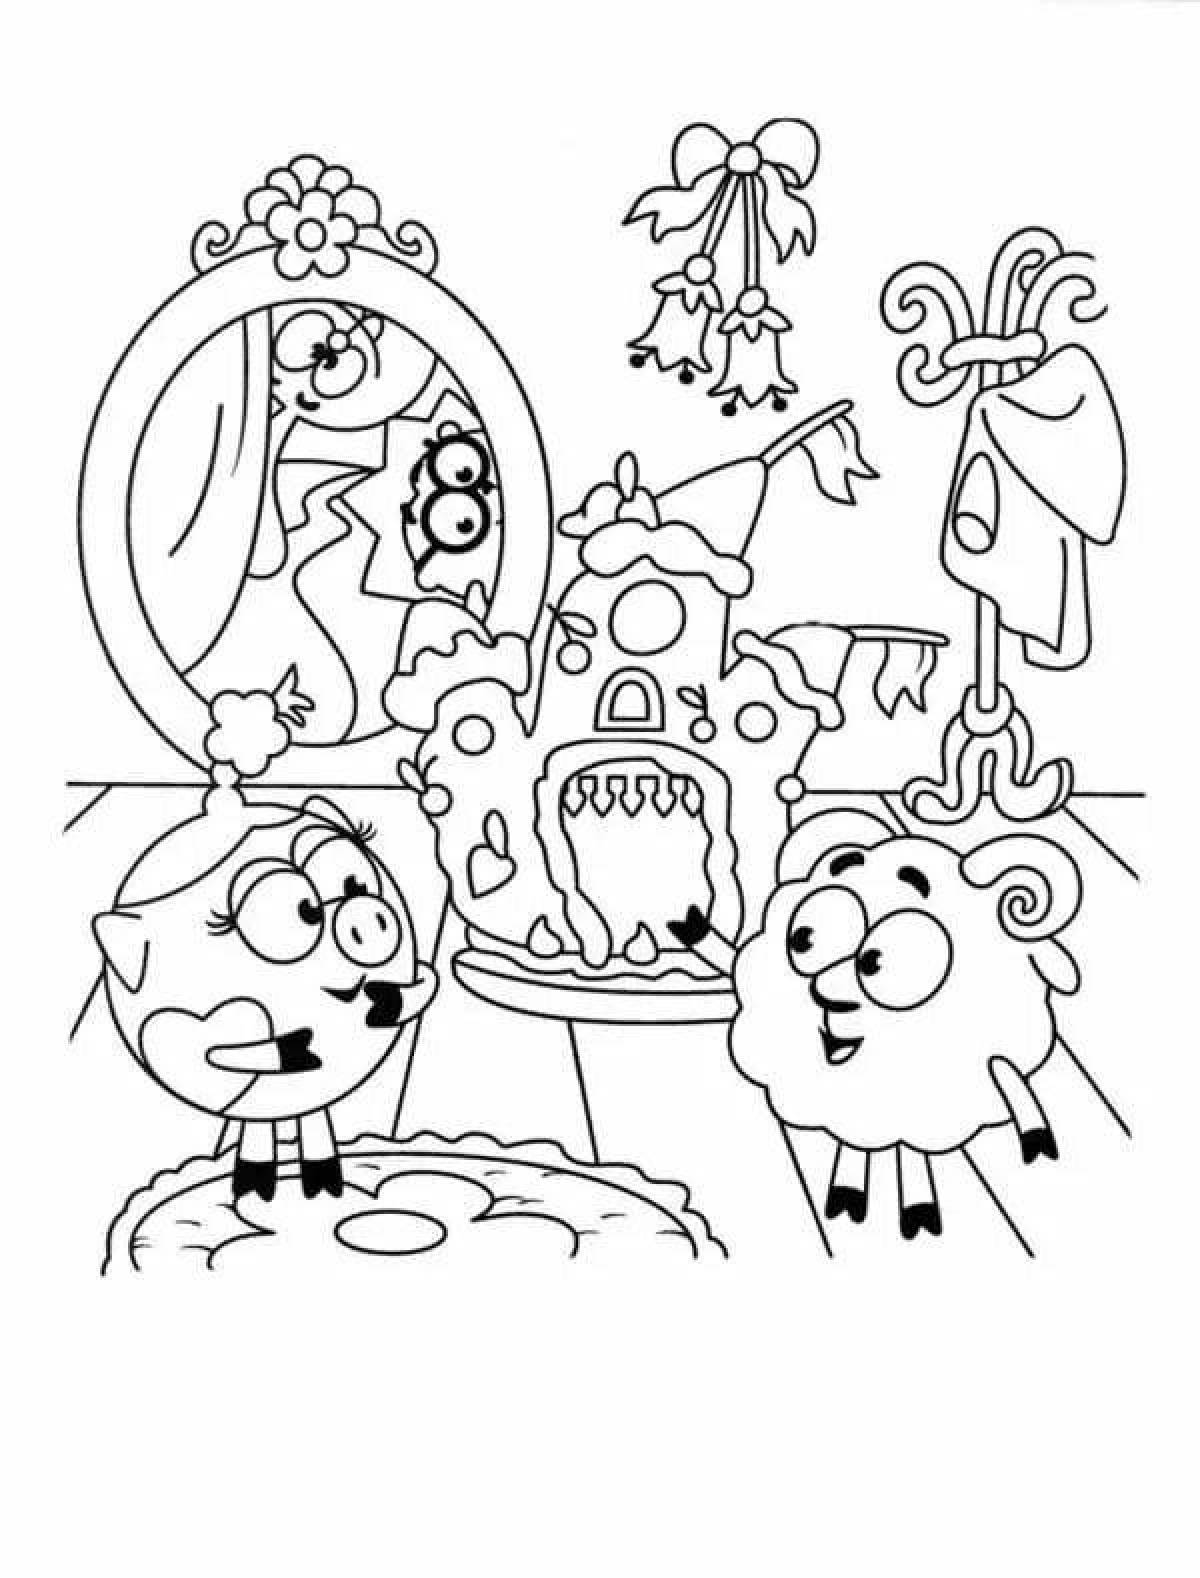 Color-frenetic all smeshariki together coloring book